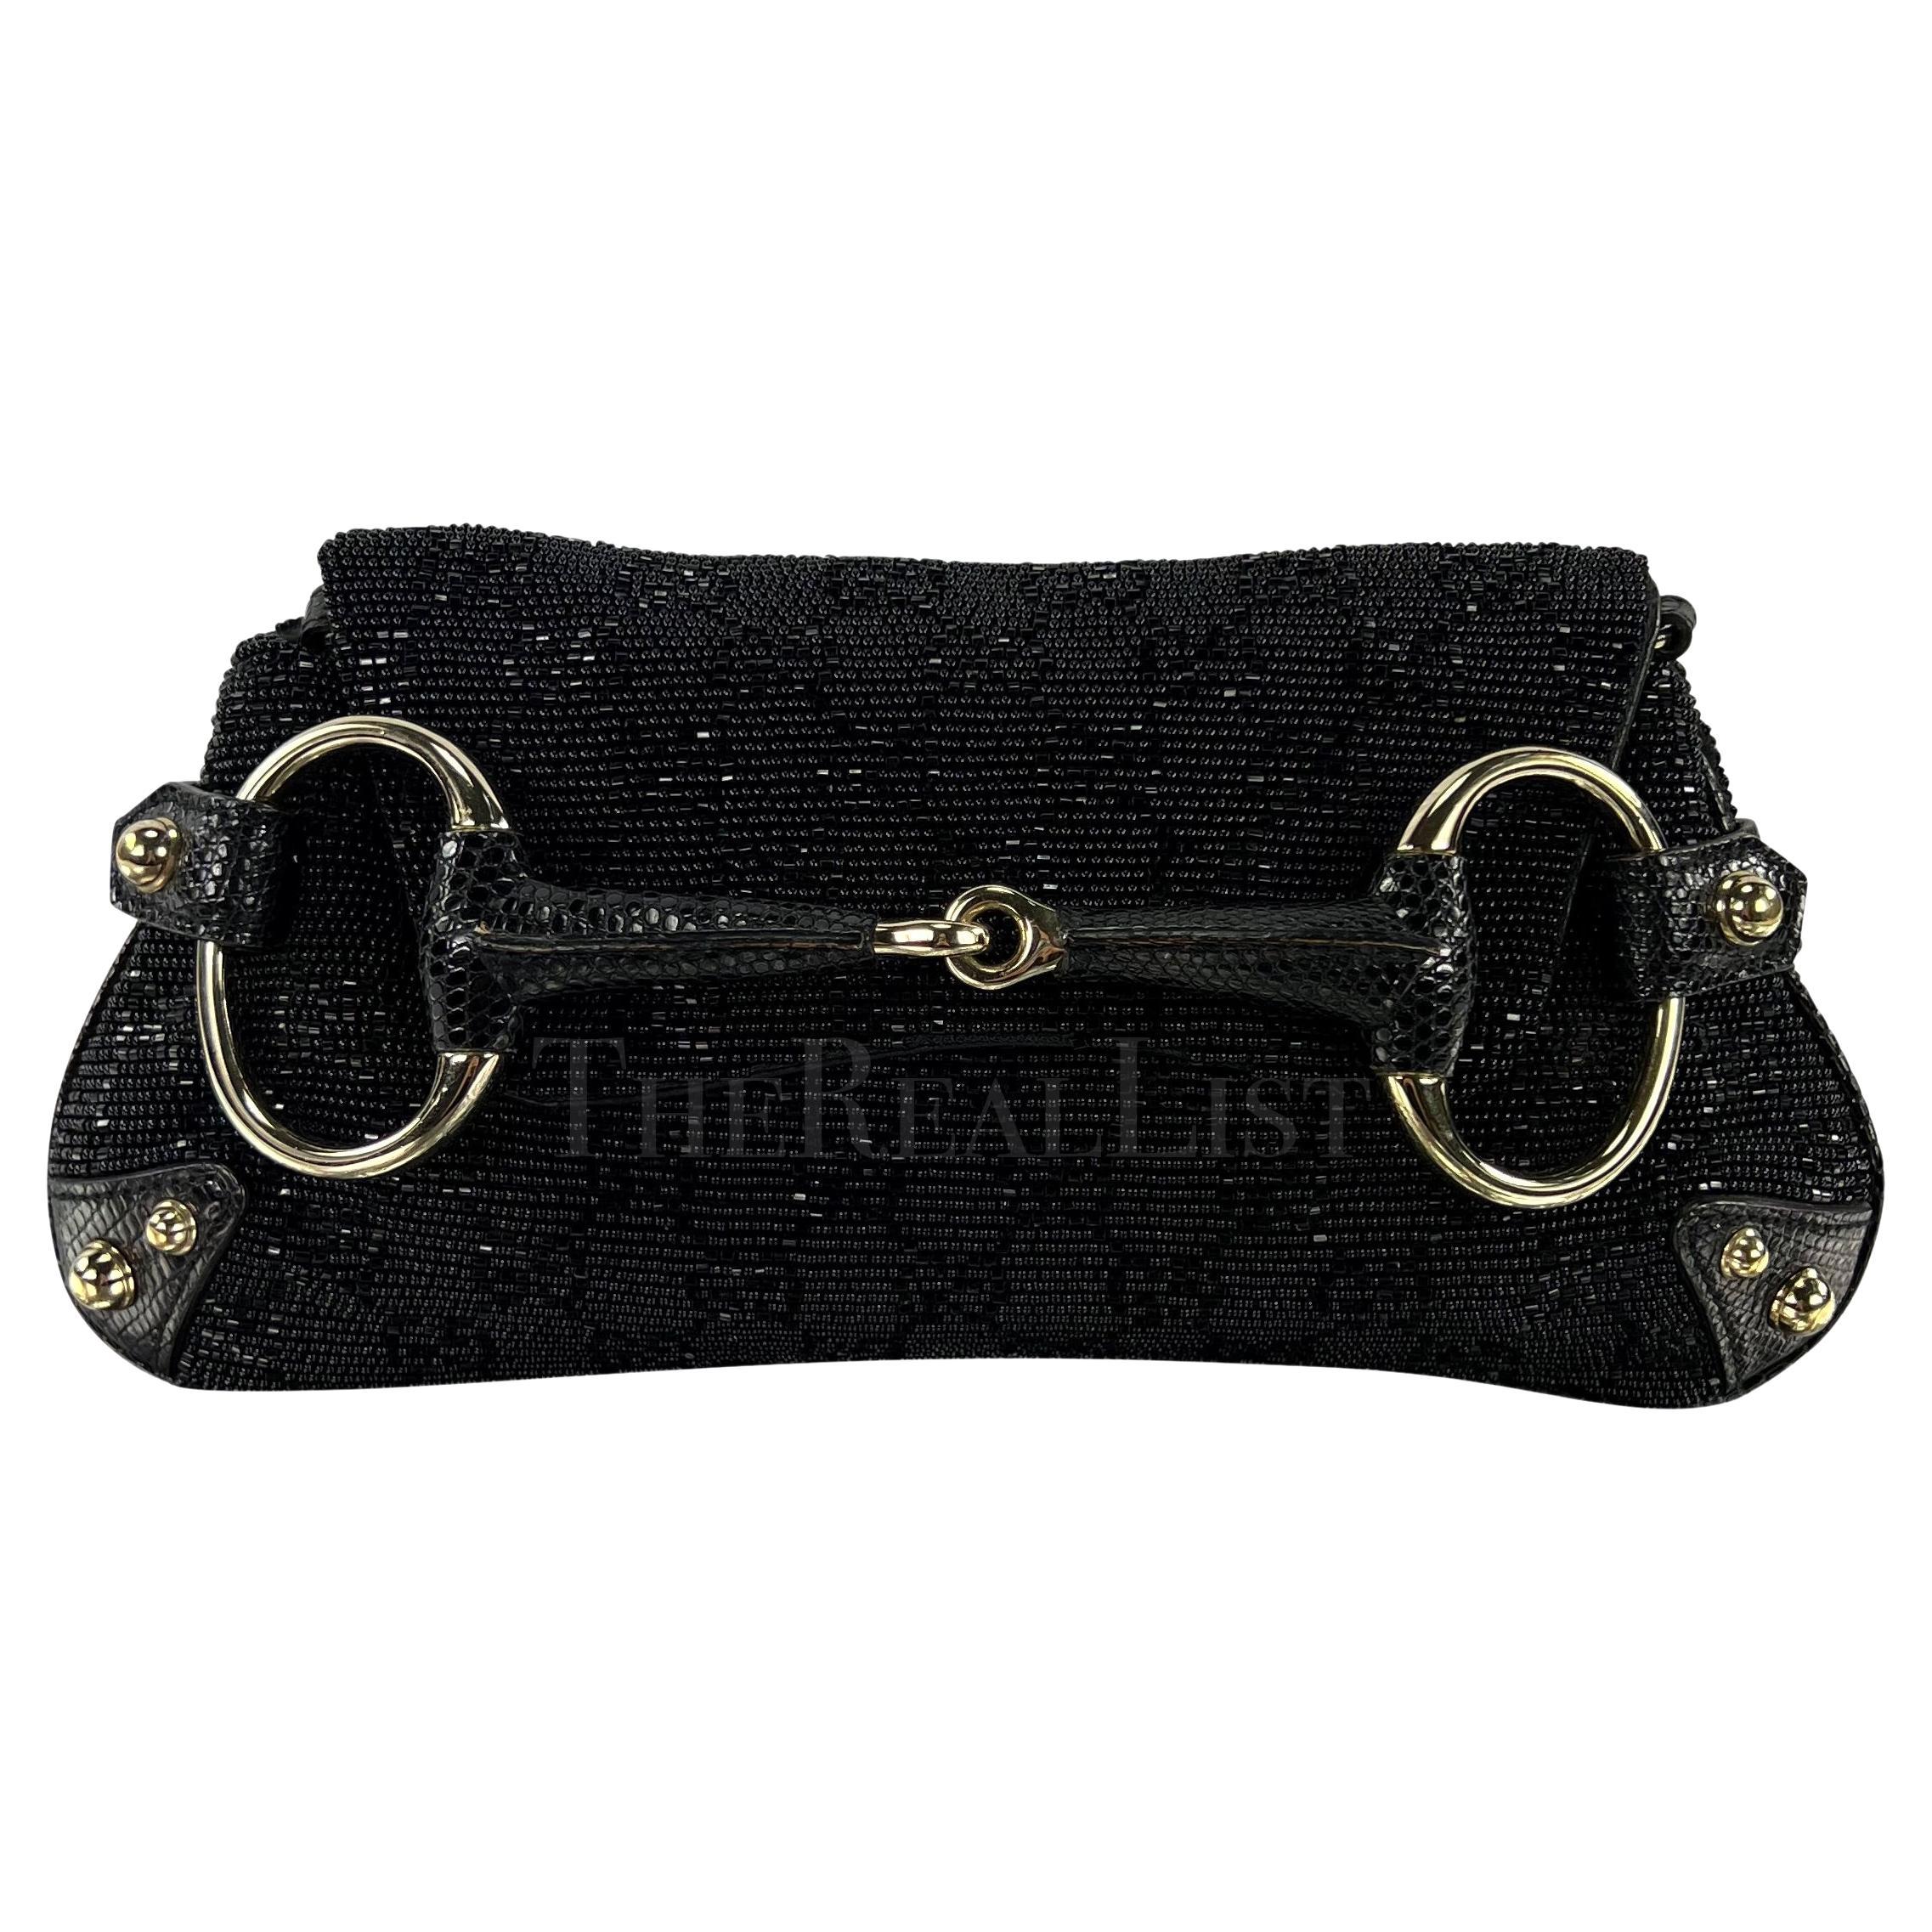 TheRealList present: a black beaded GG Gucci horse-bit bag, designed by Tom Ford. From the early 2000s, this classic Ford horse-bit bag style is made complete with beading with Gucci's emblematic 'GG' pattern and chic lizard accents. This versatile